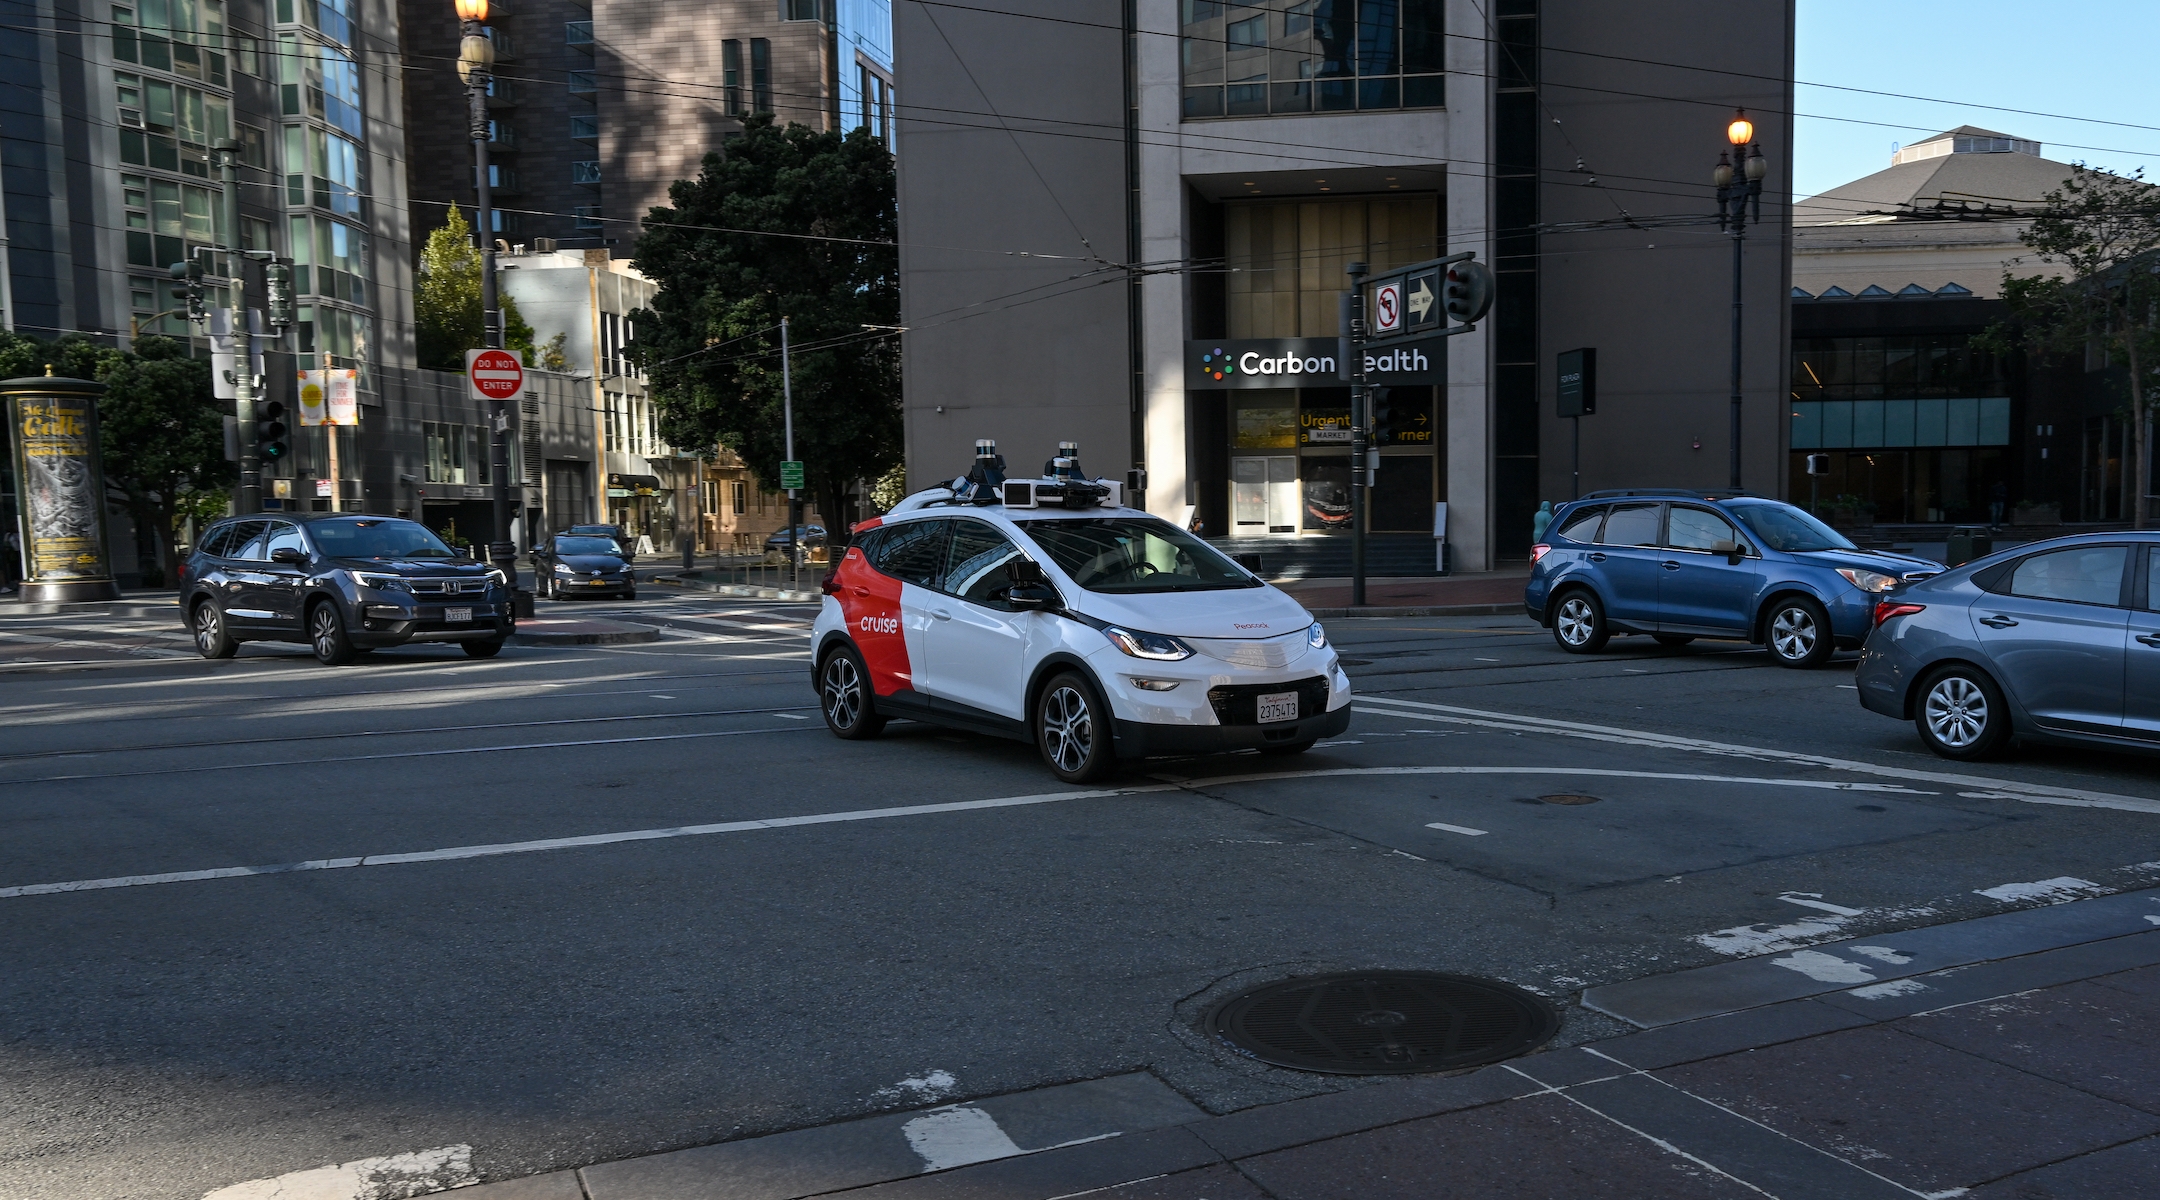 A Cruise autonomous vehicle is seen during operation in San Francisco on July 24, 2023. (Tayfun Coskun/Anadolu Agency via Getty Images)